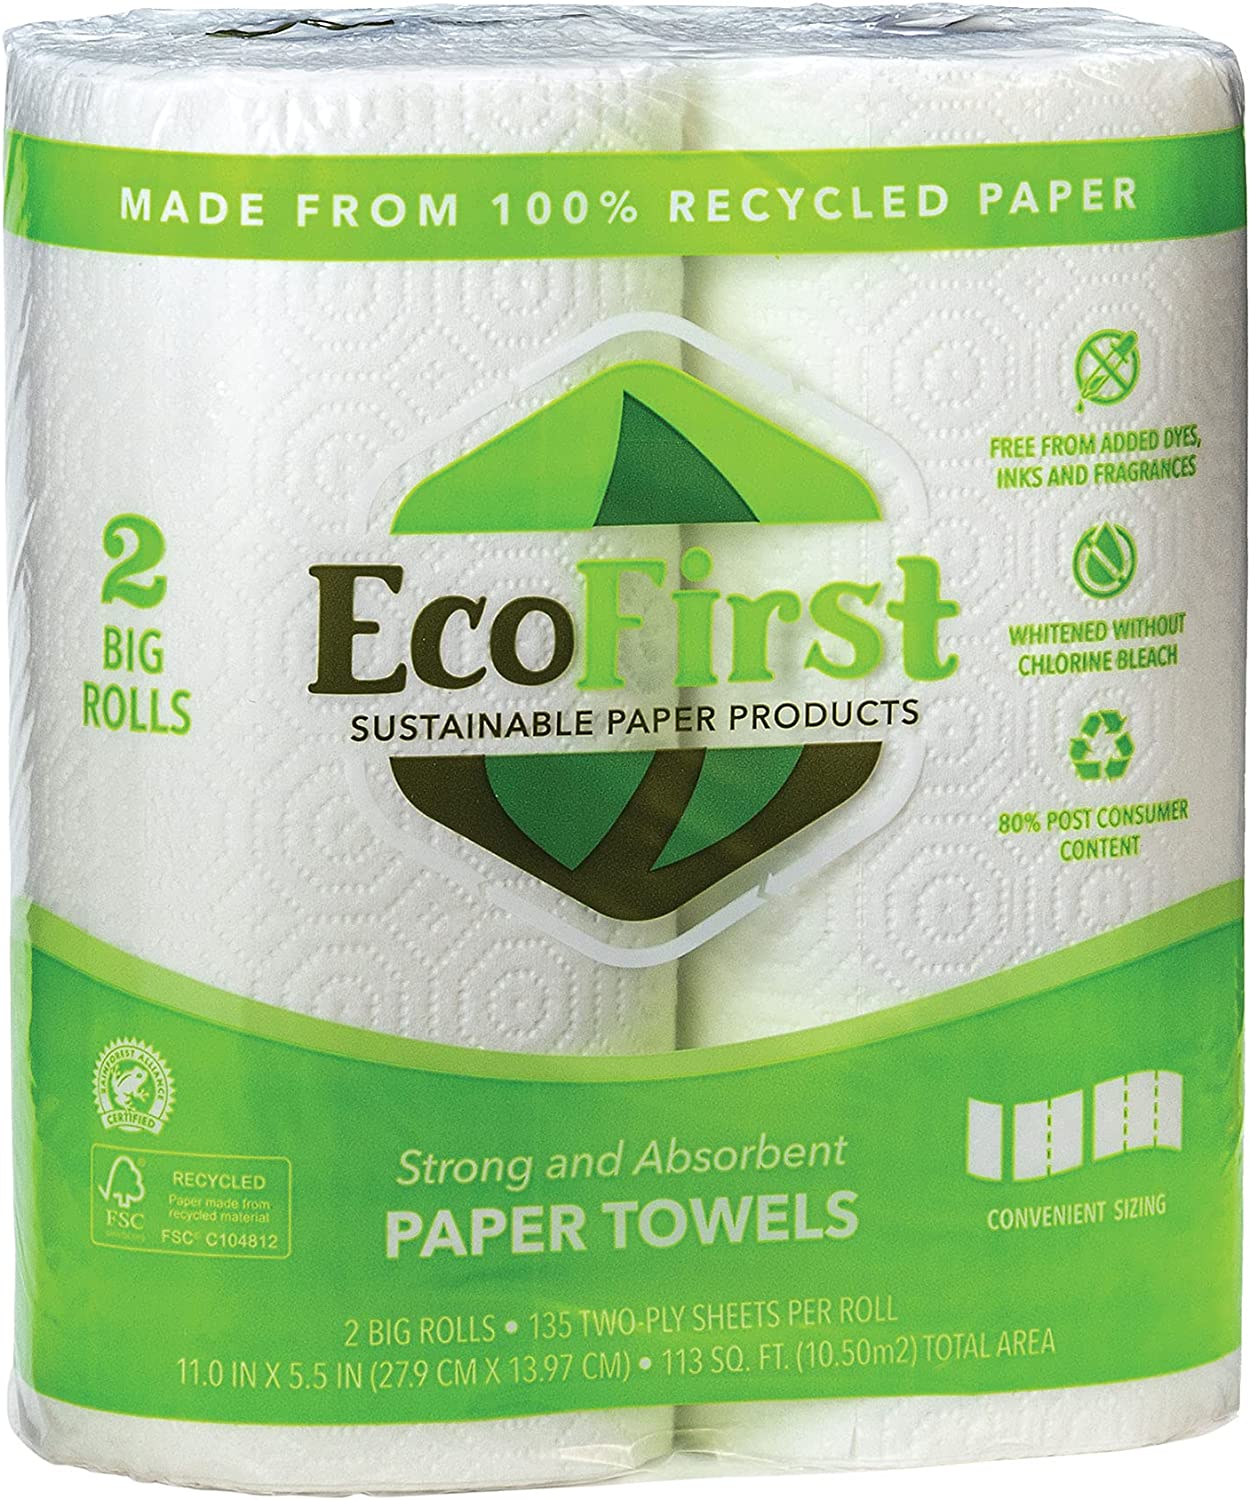 EcoFirst Chlorine & Dye Free Recycled Paper Towels